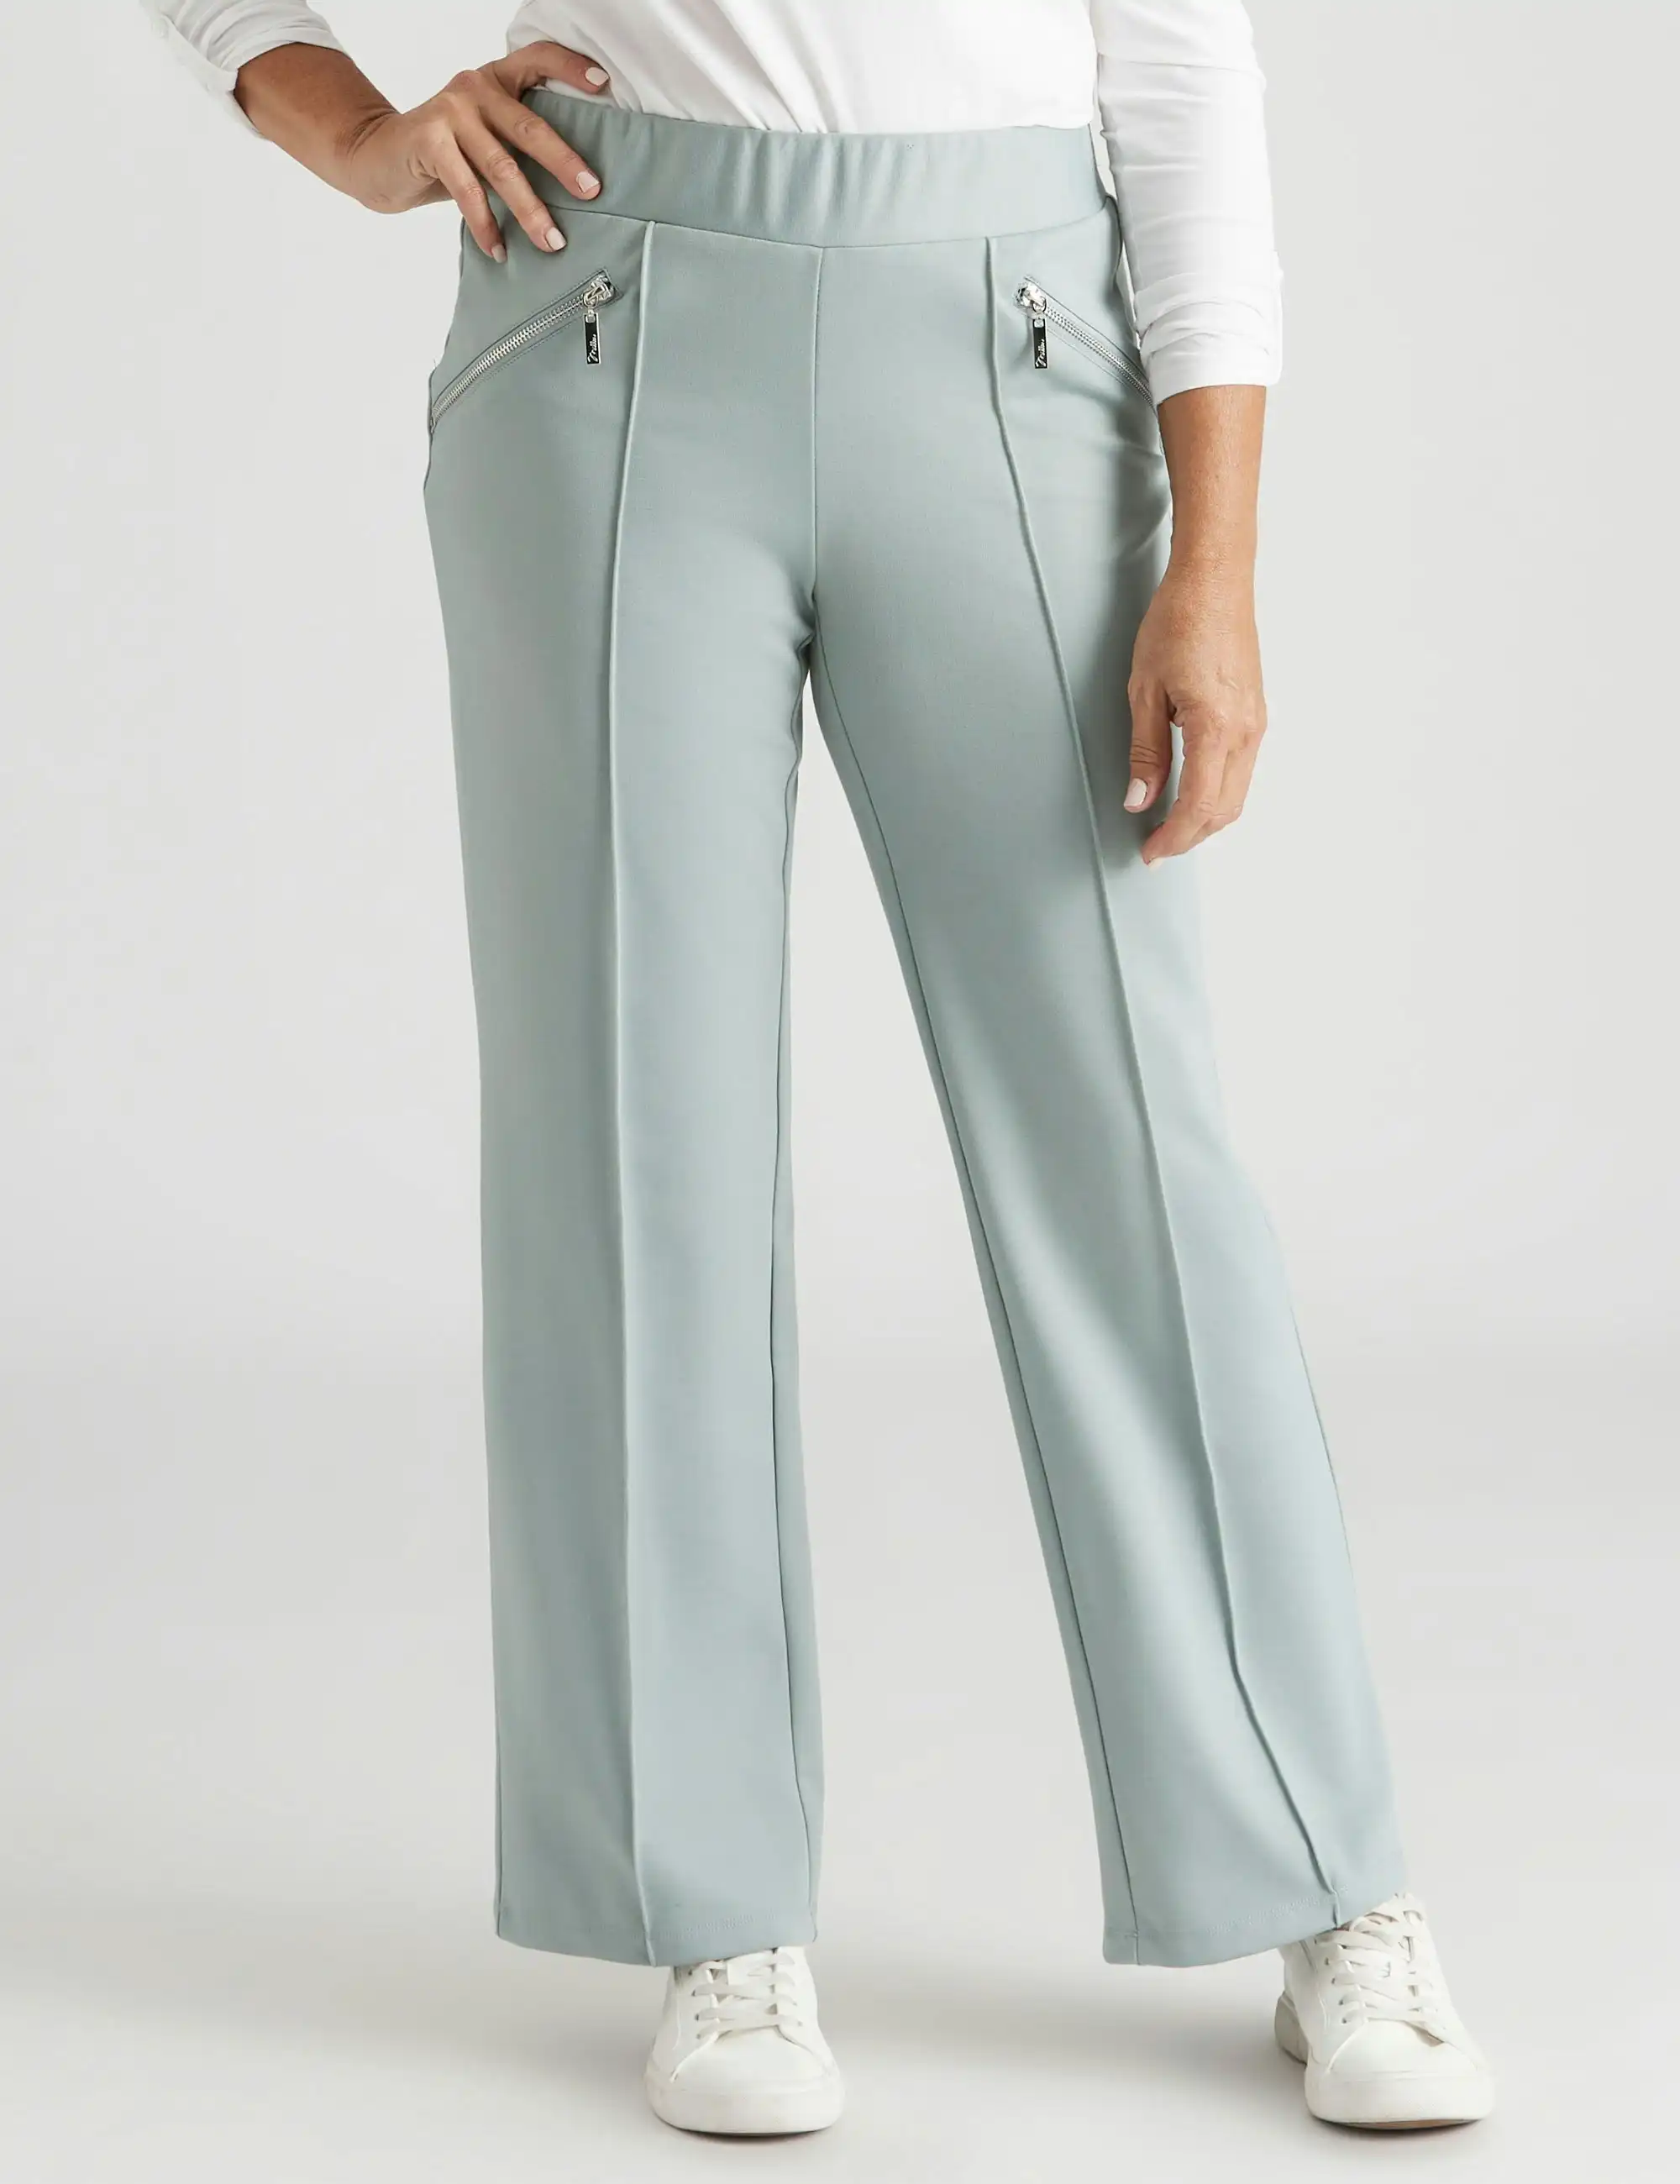 Millers Full Length Wide Leggs Pannelled Ponte Zipped Pants (Sage)